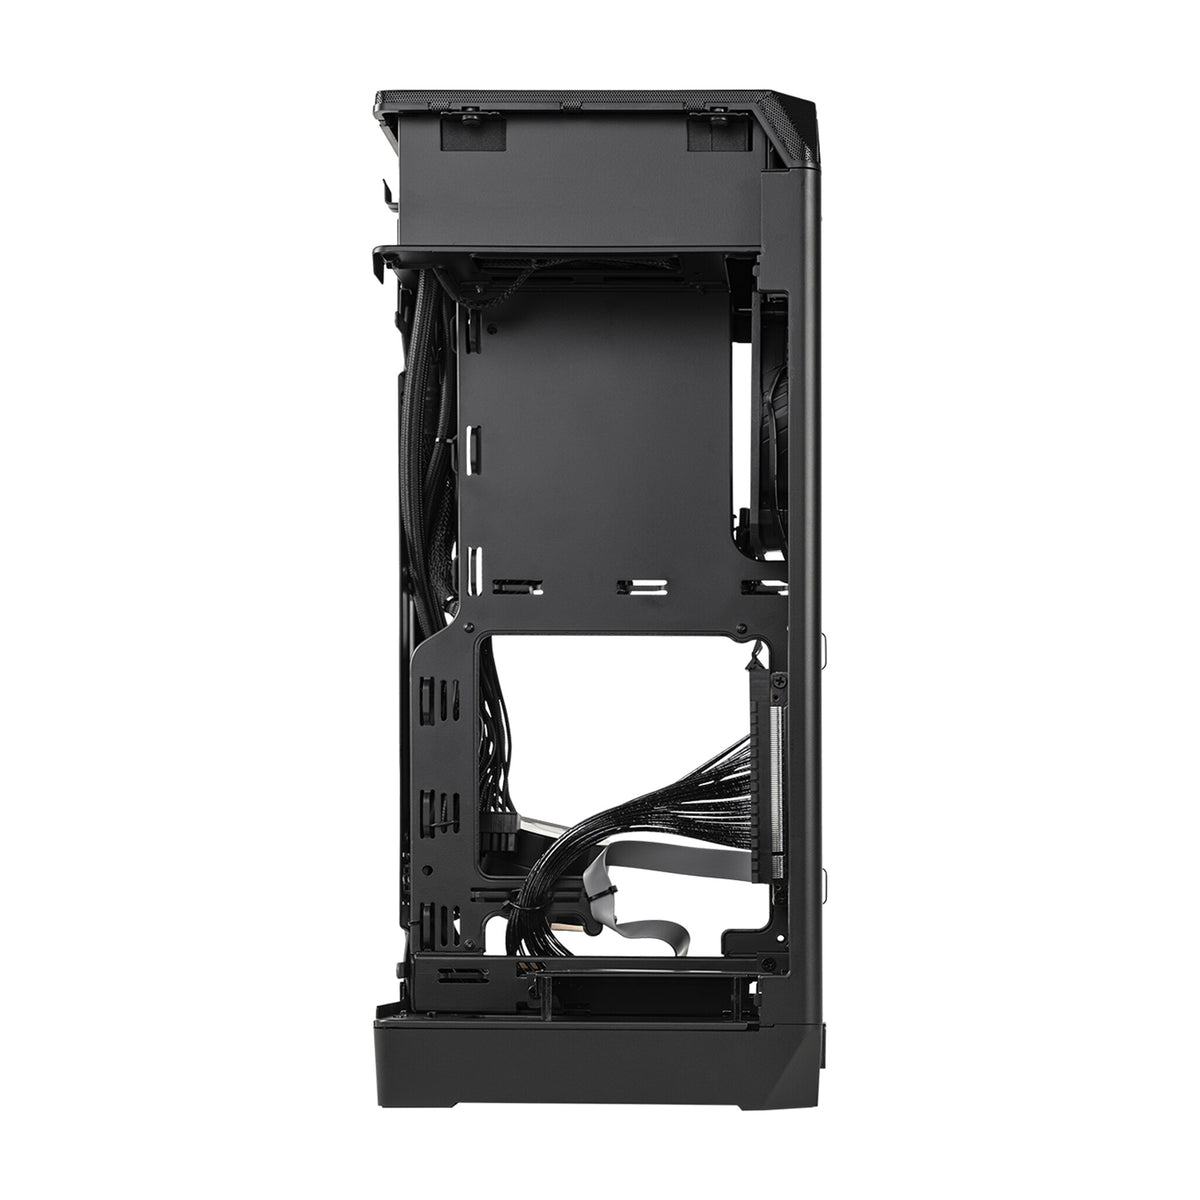 Cooler Master NCORE 100 MAX - ITX SFF Tower Case in Grey w/ 850W SFX Gold PSU